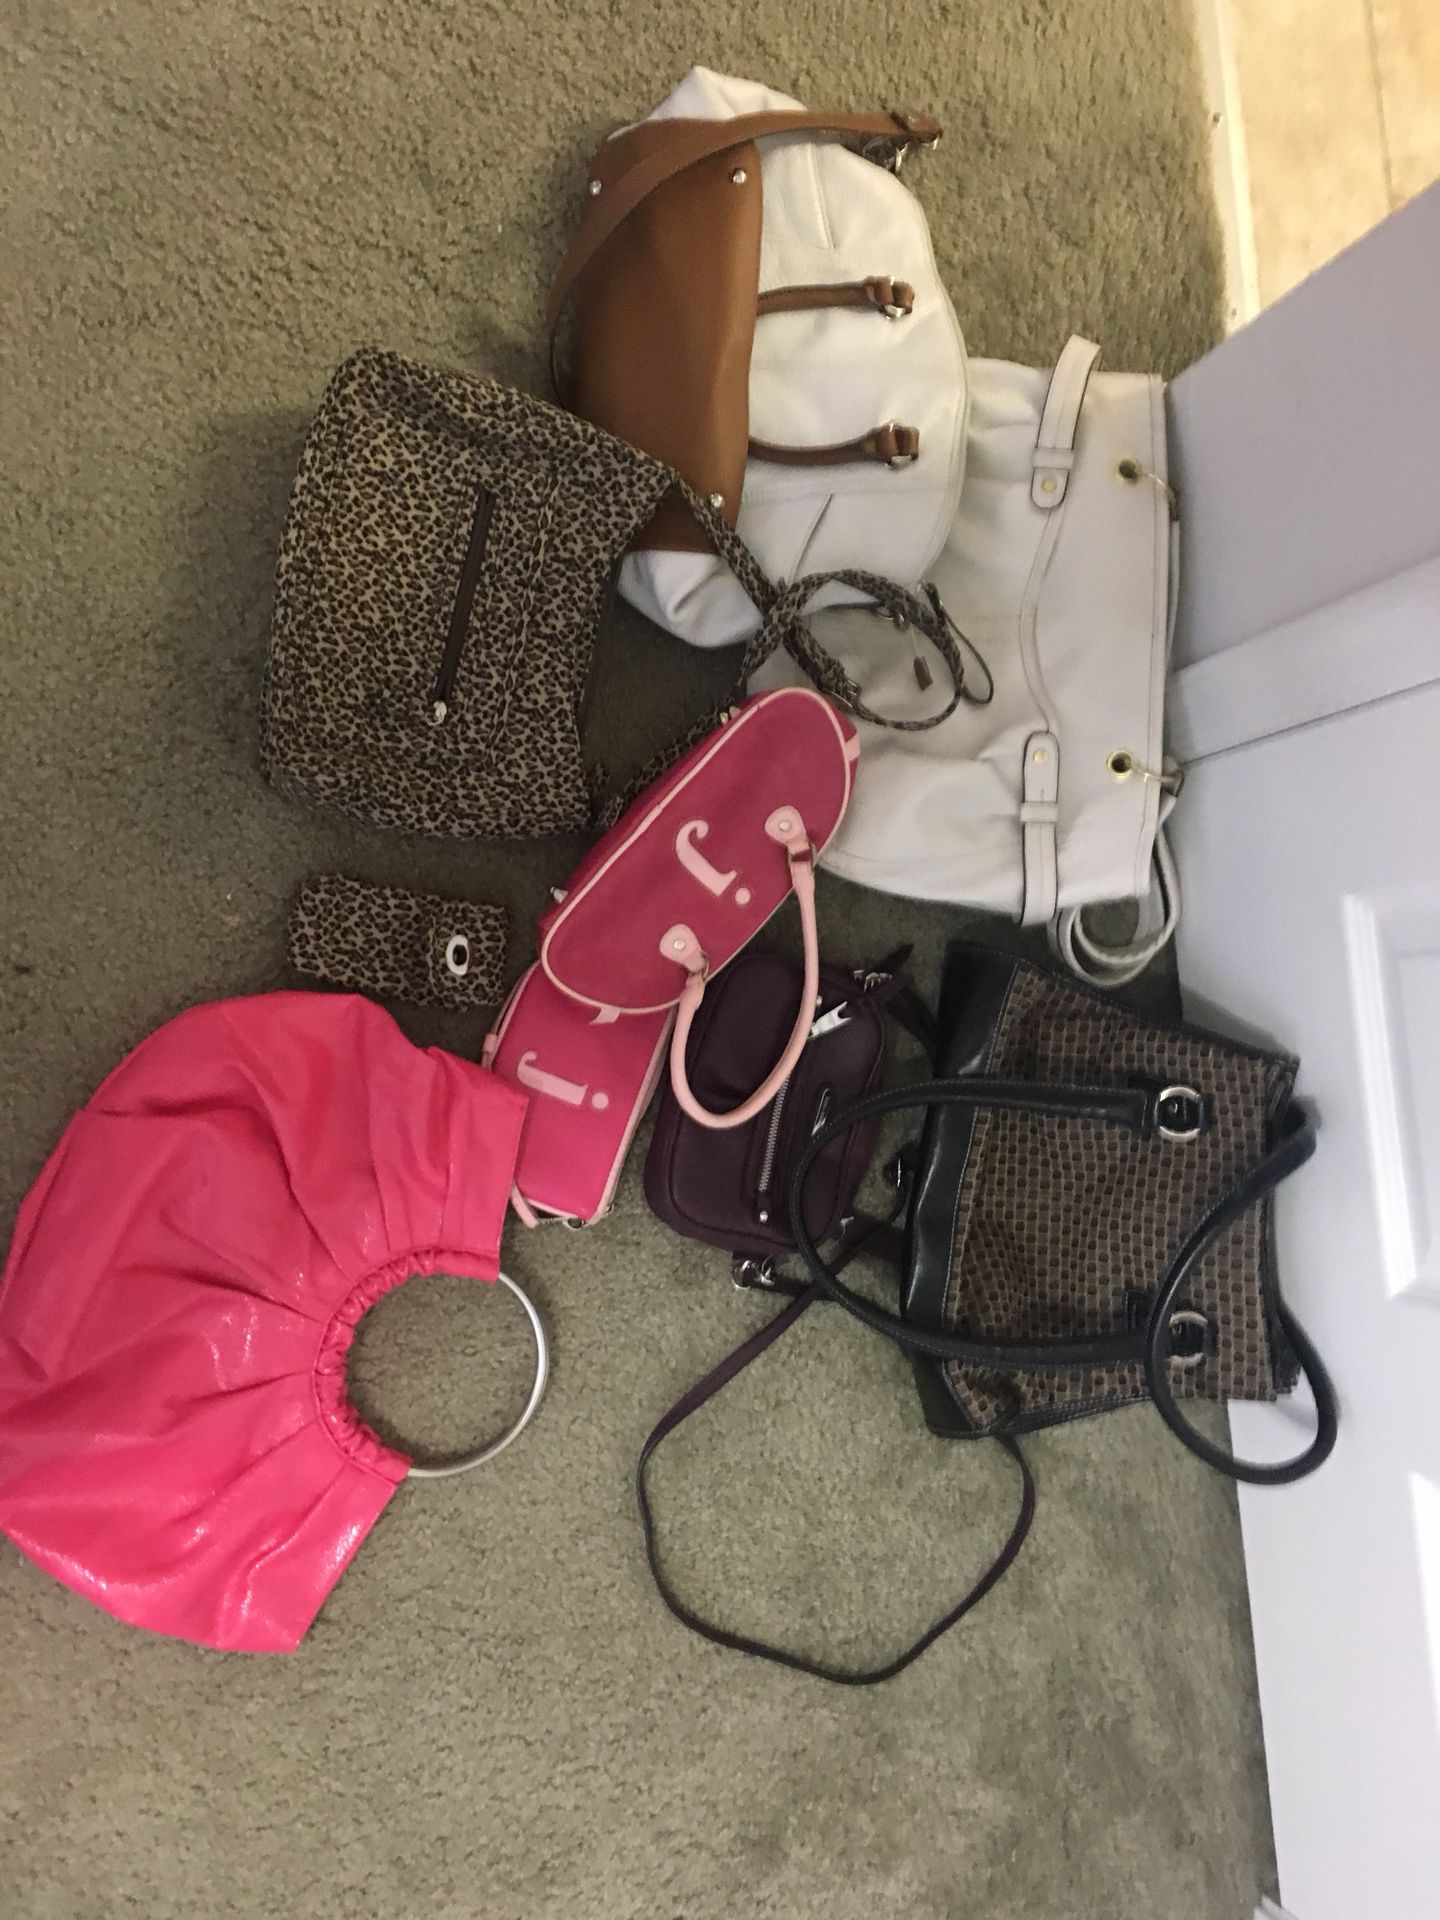 Lot of 10 designer purses including (I have new coach purse too not included in price) wallet and phone cases